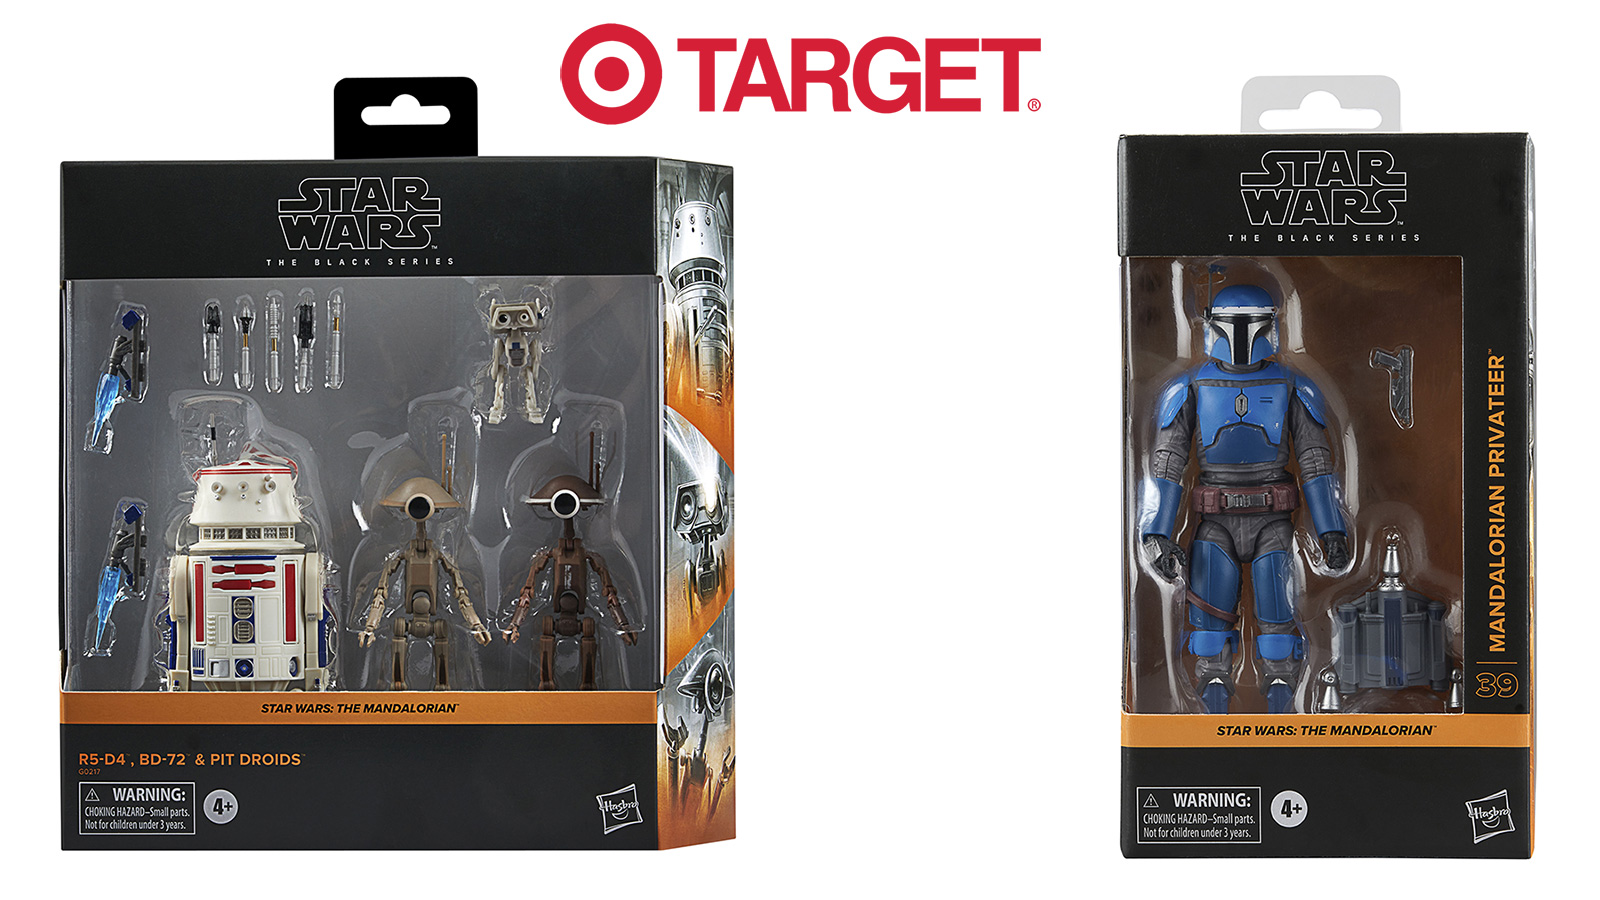 Preorder Now At Target - Exclusive TBS 6-Inch R5-D4, BD-72, & Pit Droids Set & Mandalorian Privateer